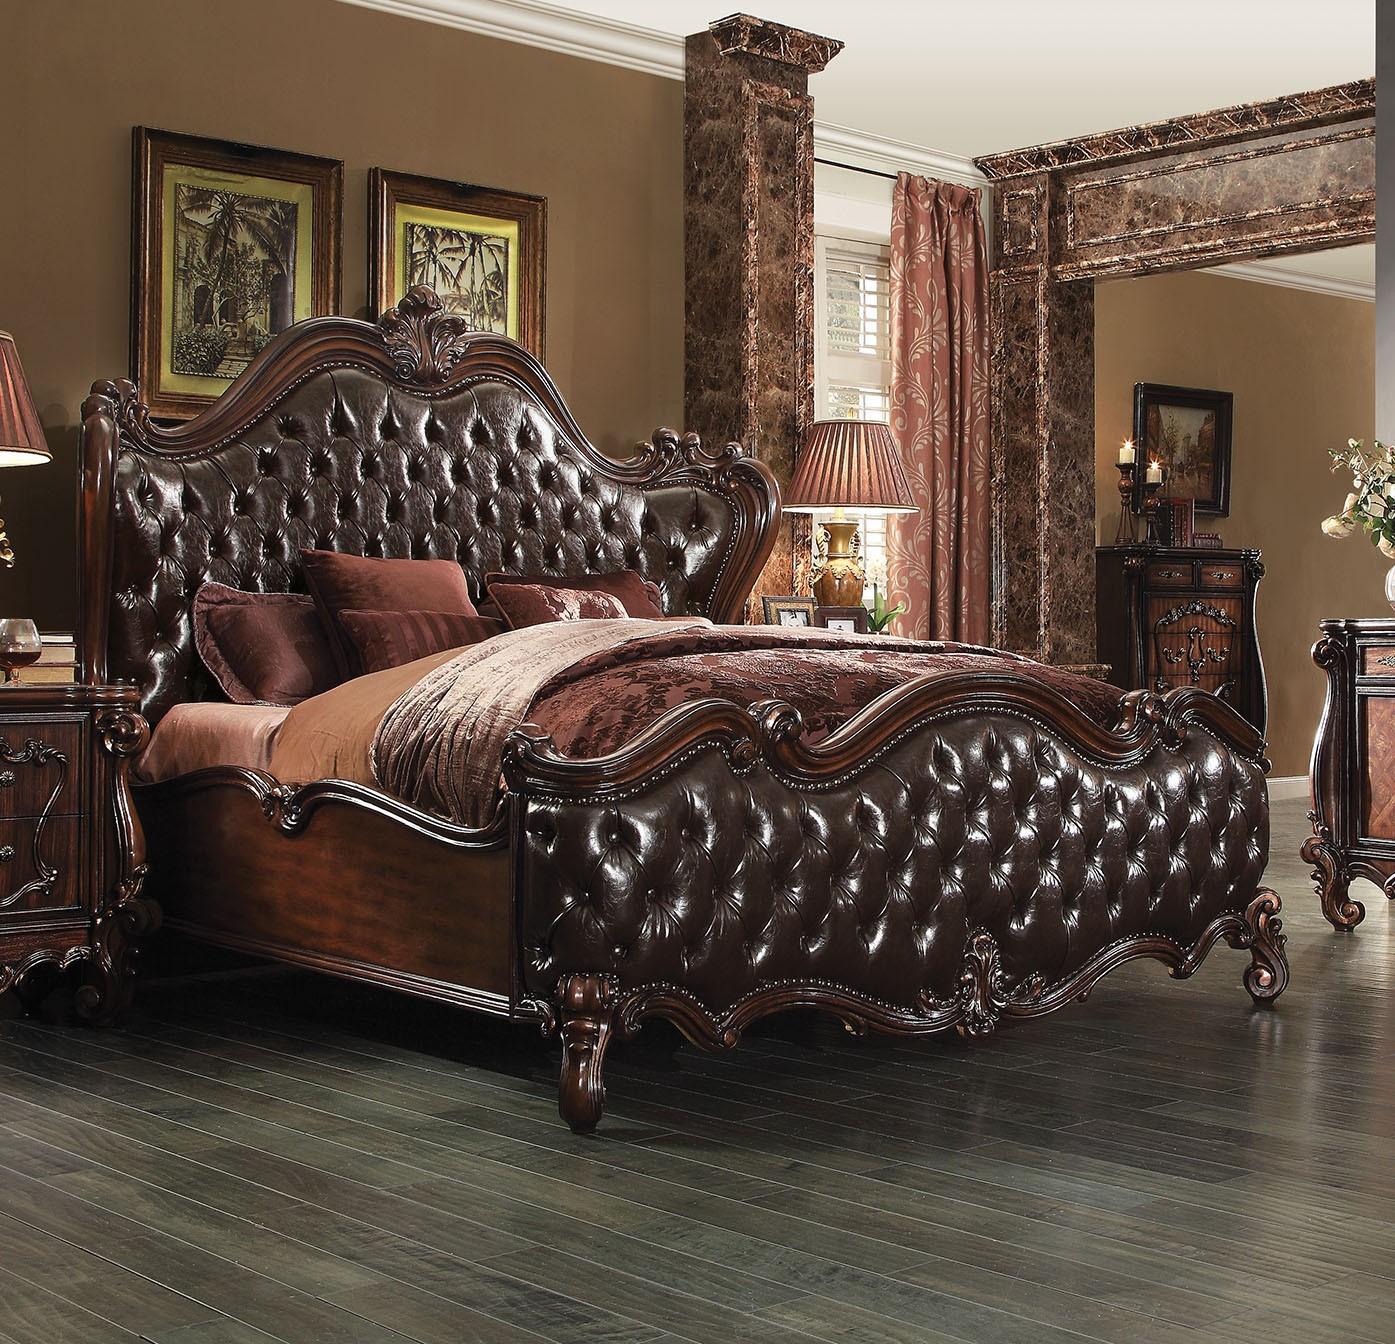 Classic, Traditional Panel Bed Versailles-21120Q Versailles-21120Q in Cherry Finish, Brown Polyurethane